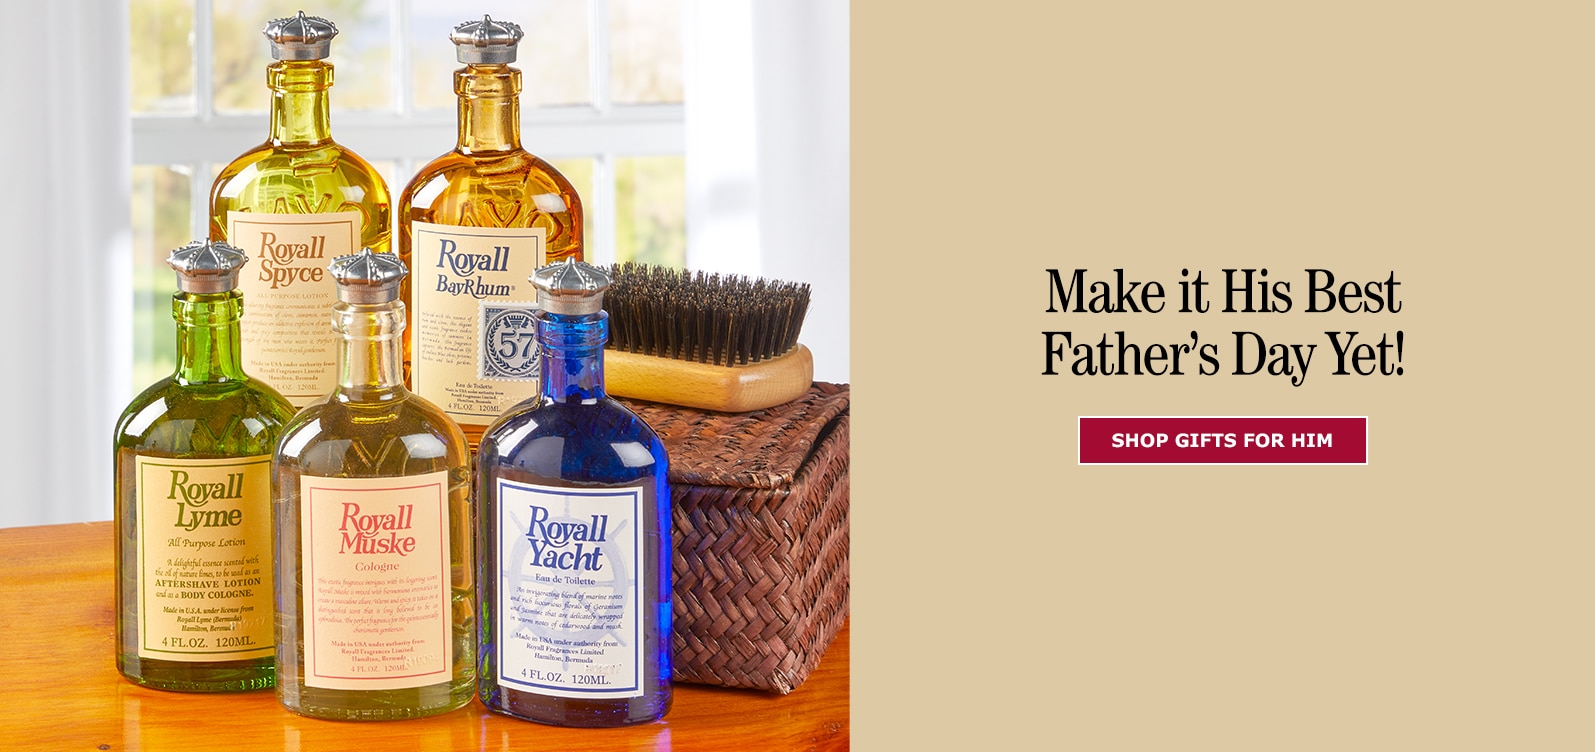 His Best Father's Day Yet! Shop Gifts for Him